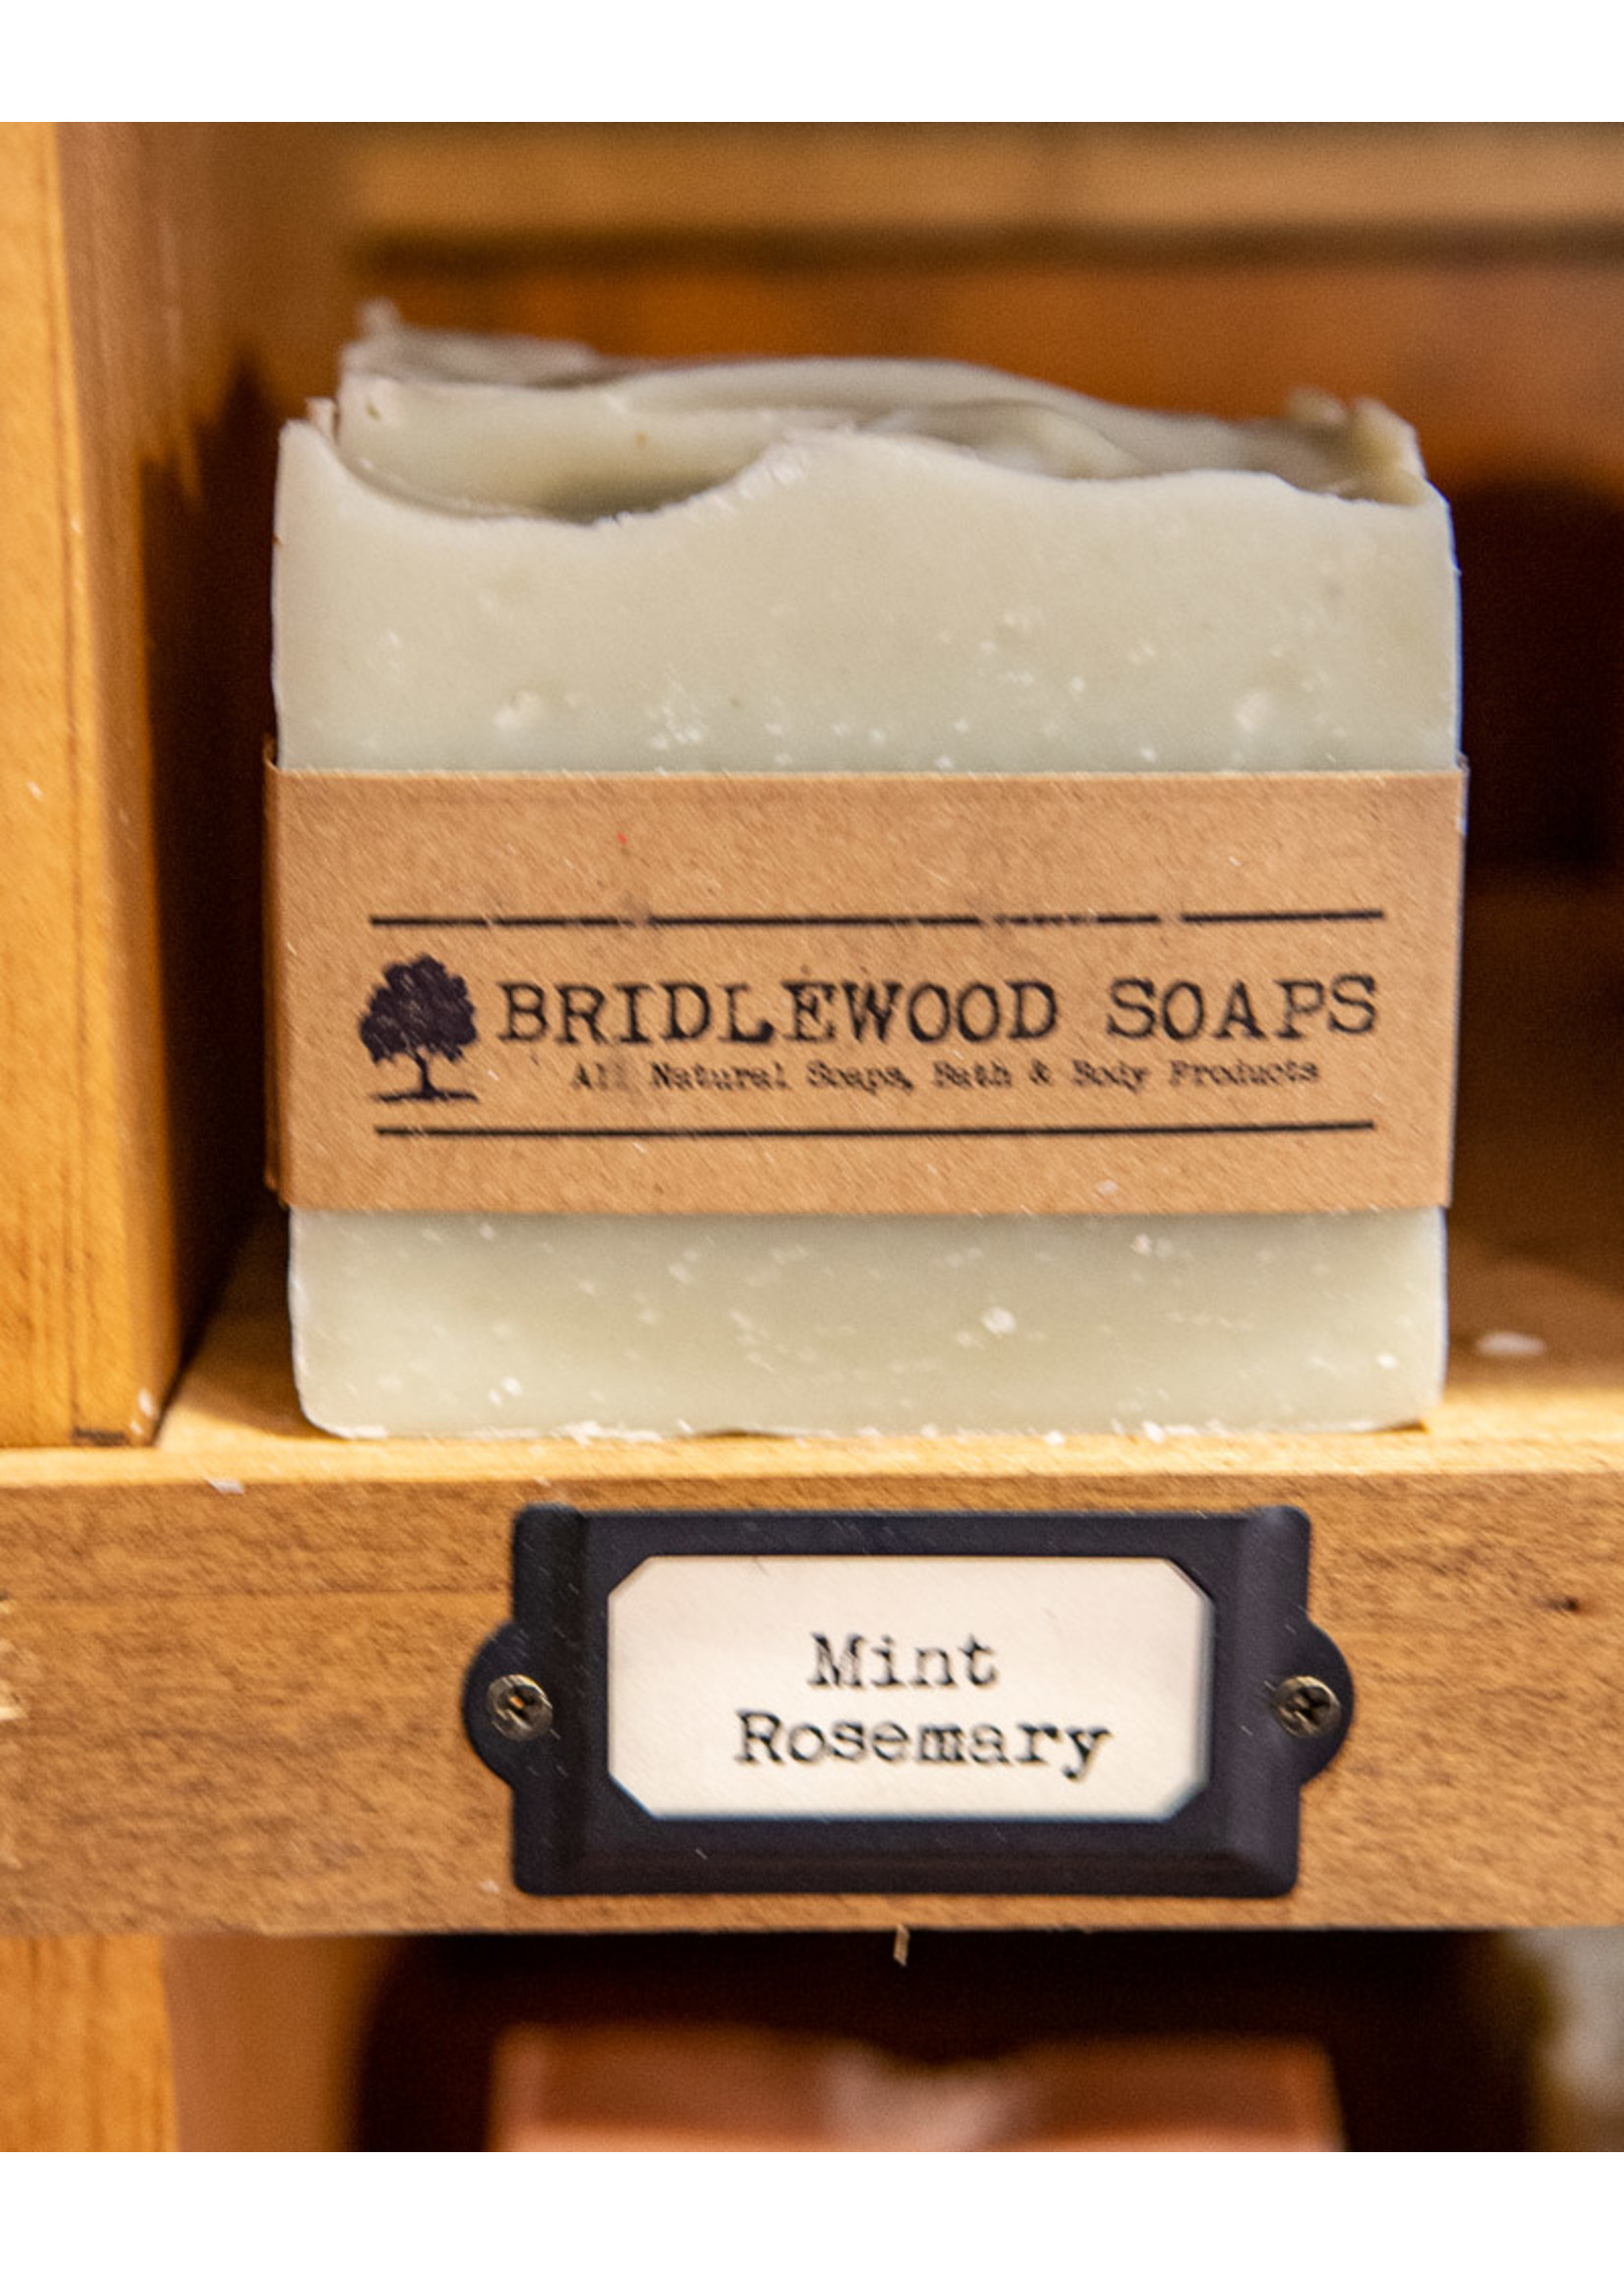 Bridlewood Soaps Mint Rosemary  Soap Bar